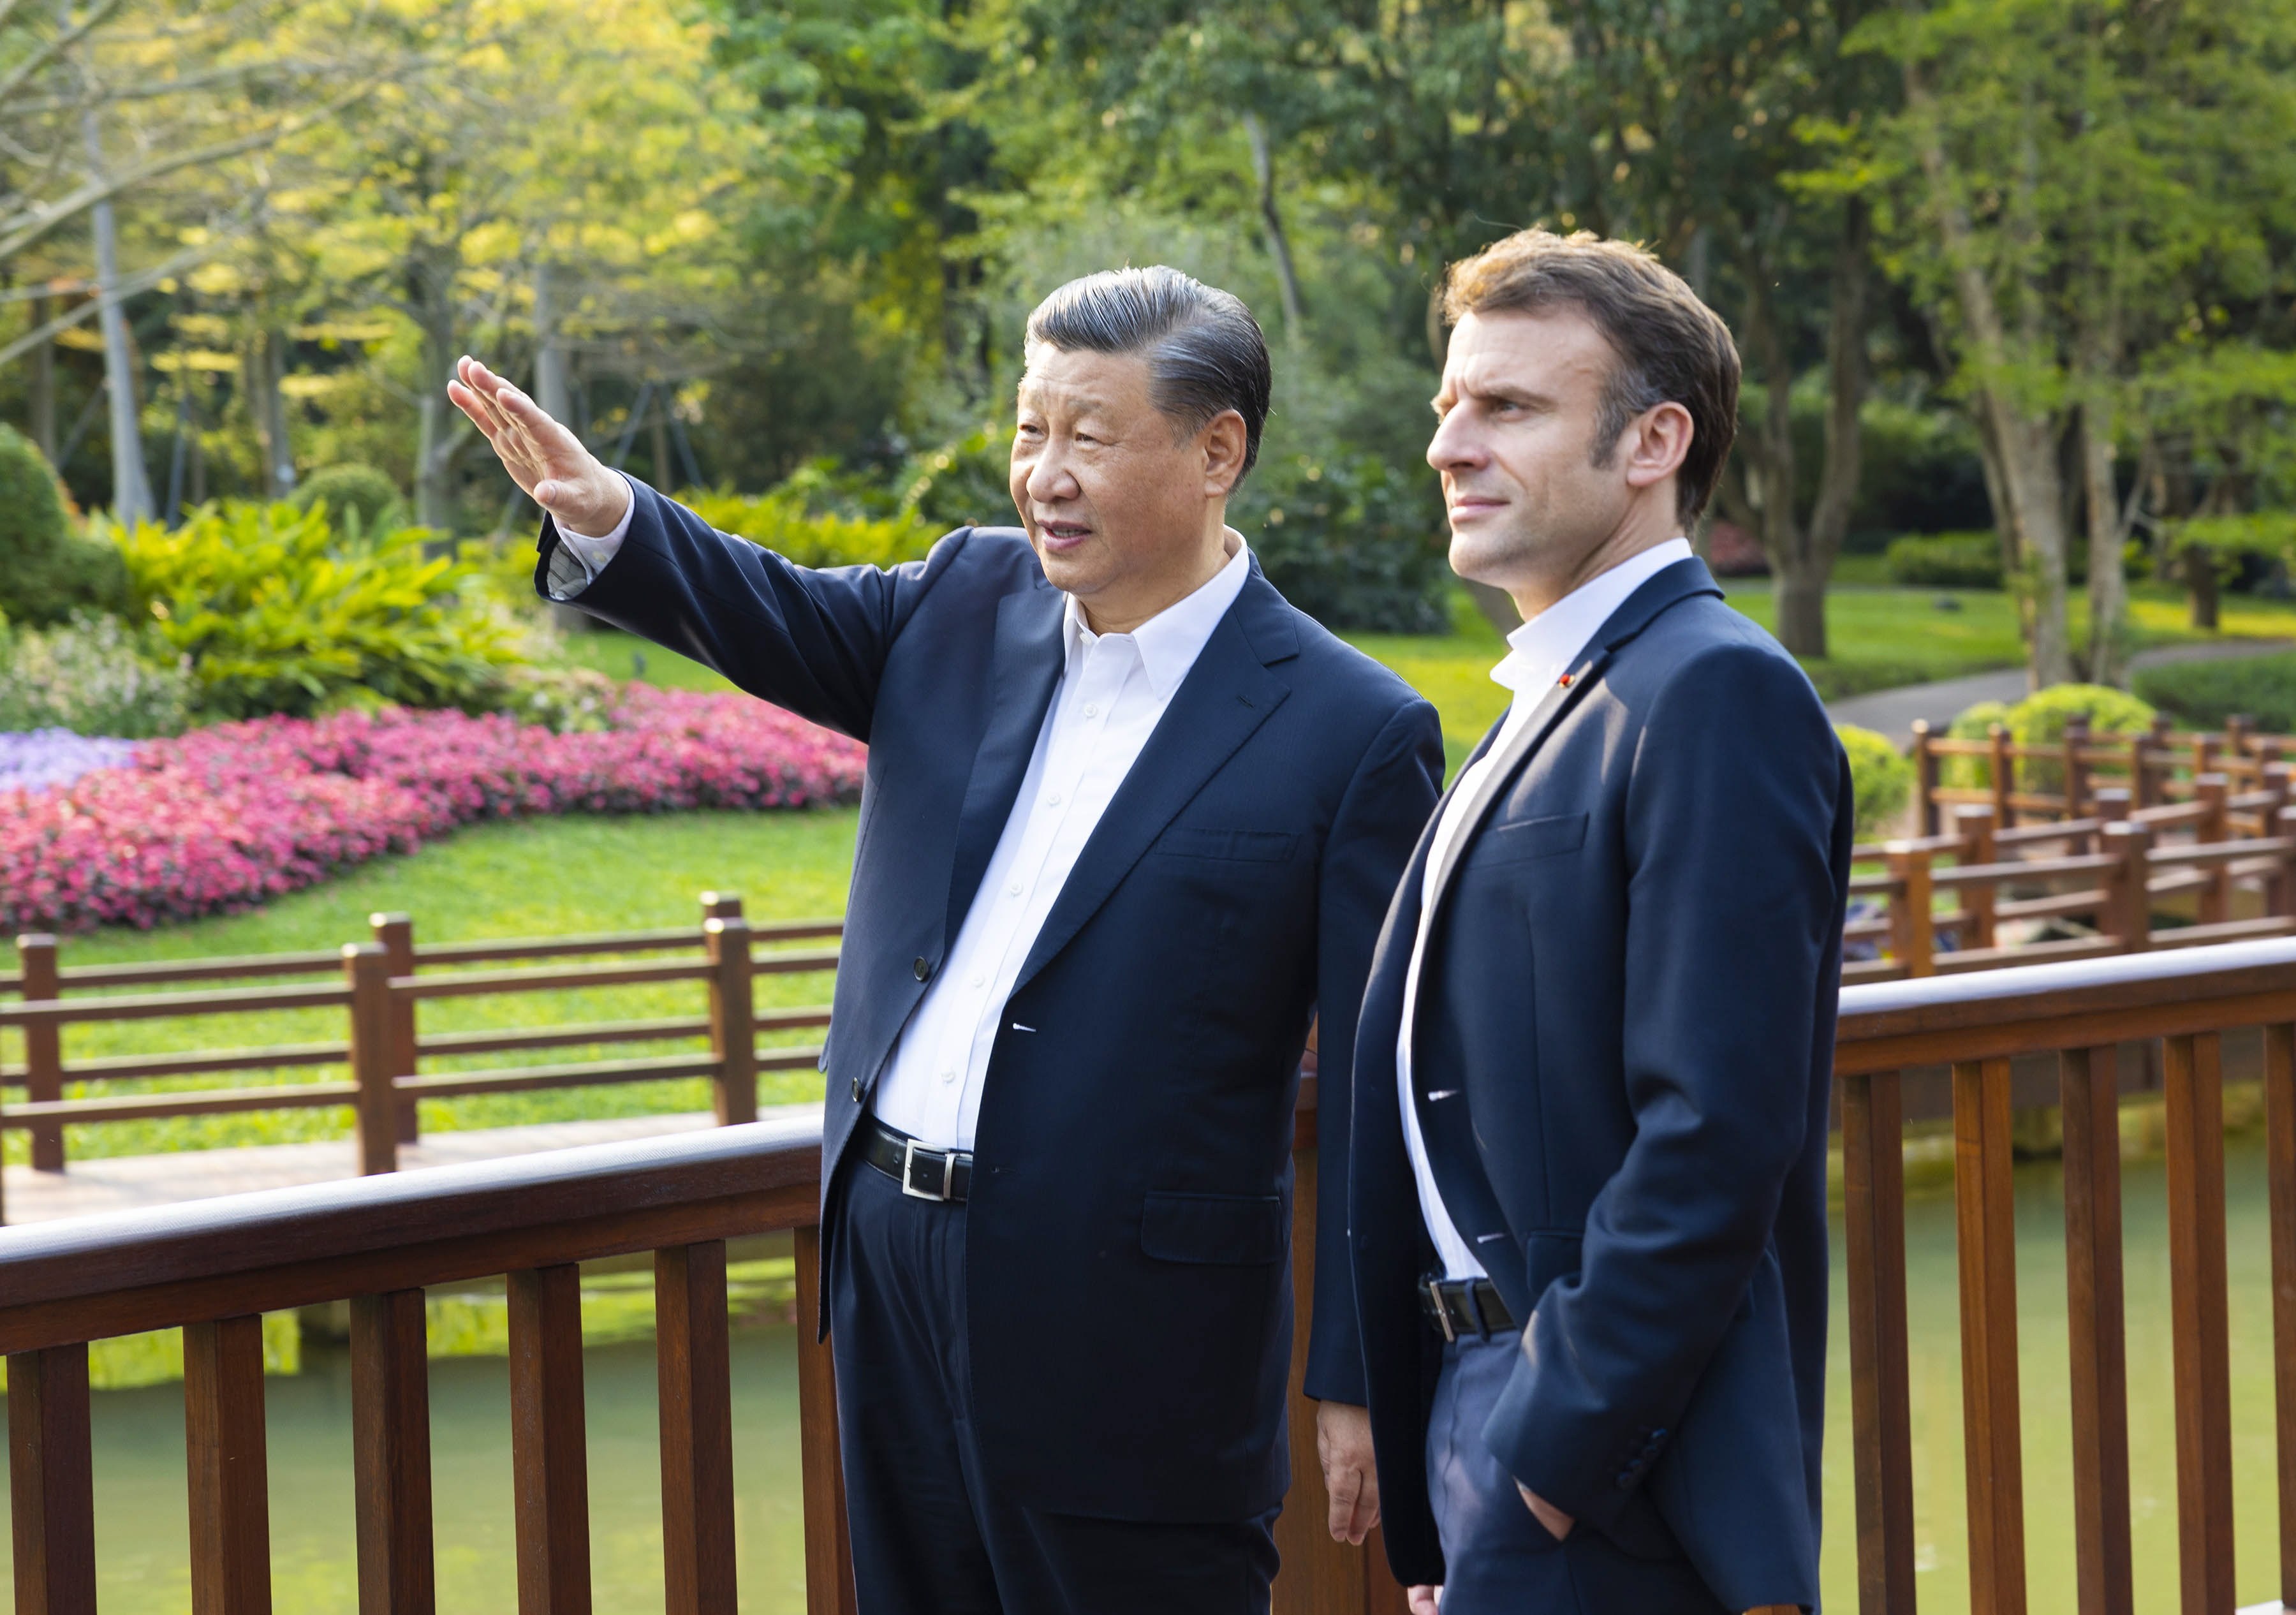 Chinese President Xi Jinping and French President Emmanuel Macron chat during a stroll through the Pine Garden in Guangzhou on April 7. Macron has alluded to to an unhealthy, even dangerous, trend in transatlantic relations. Photo: EPA-EFE/Xinhua